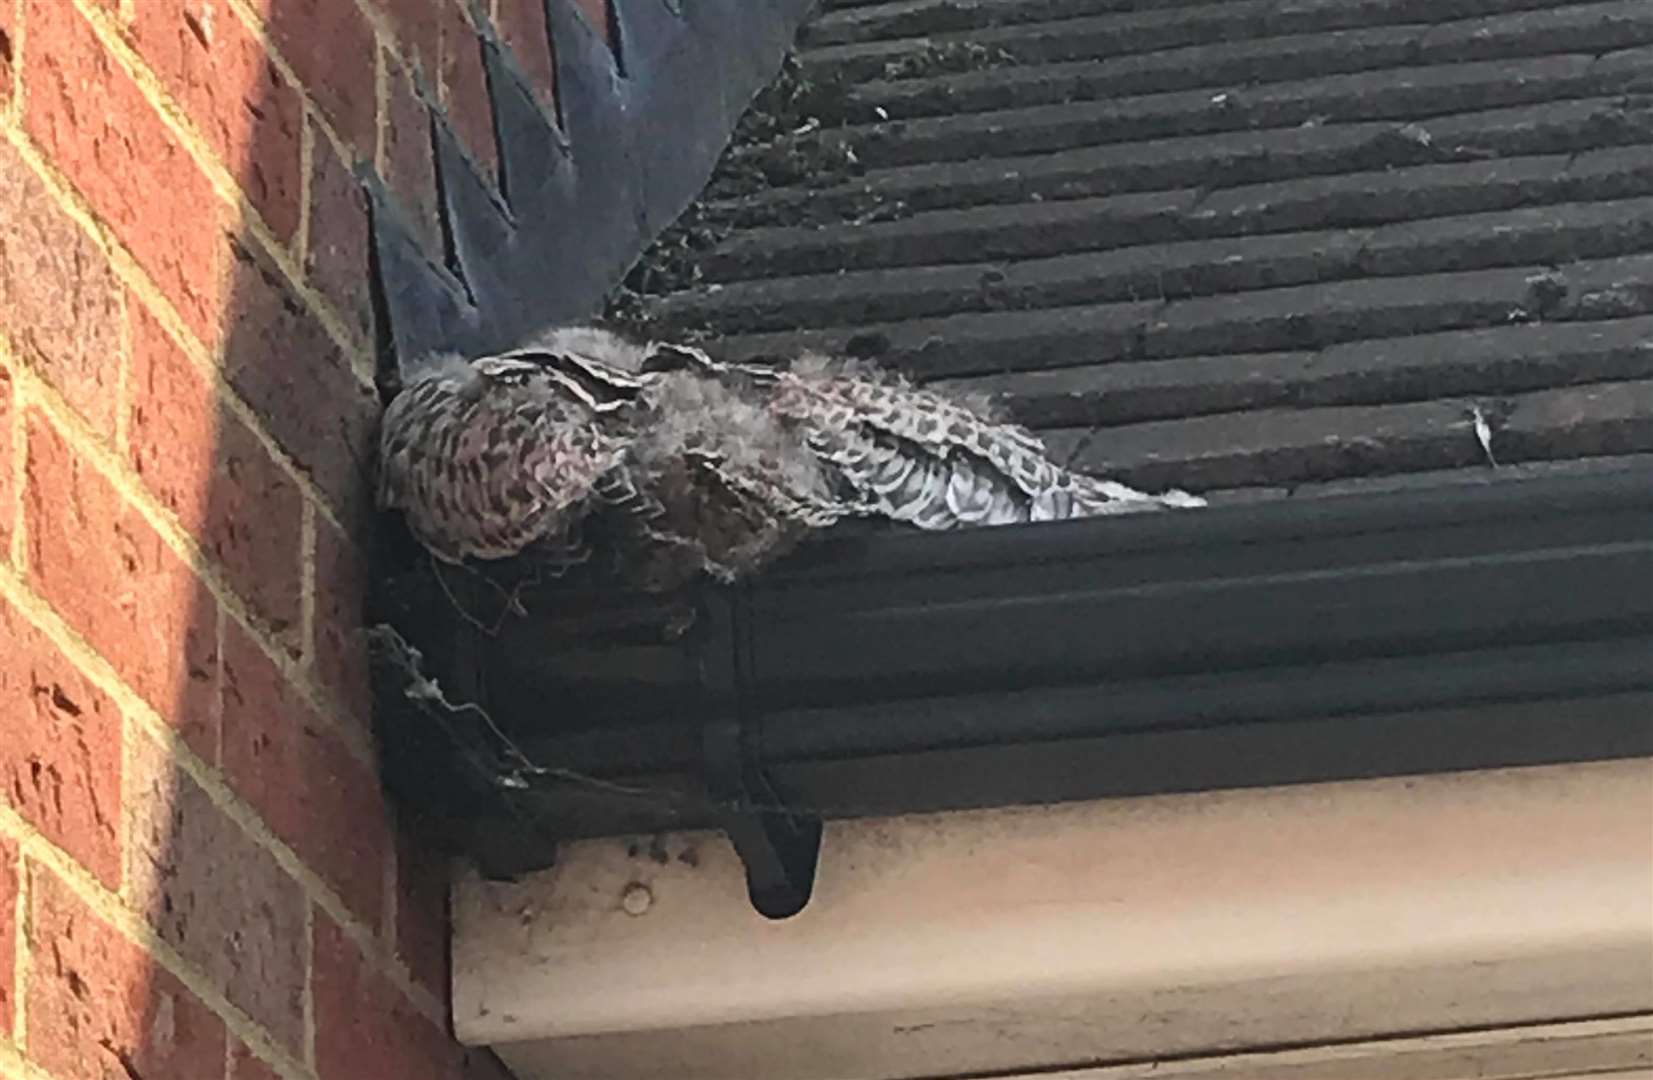 The gull stuck in the gutter